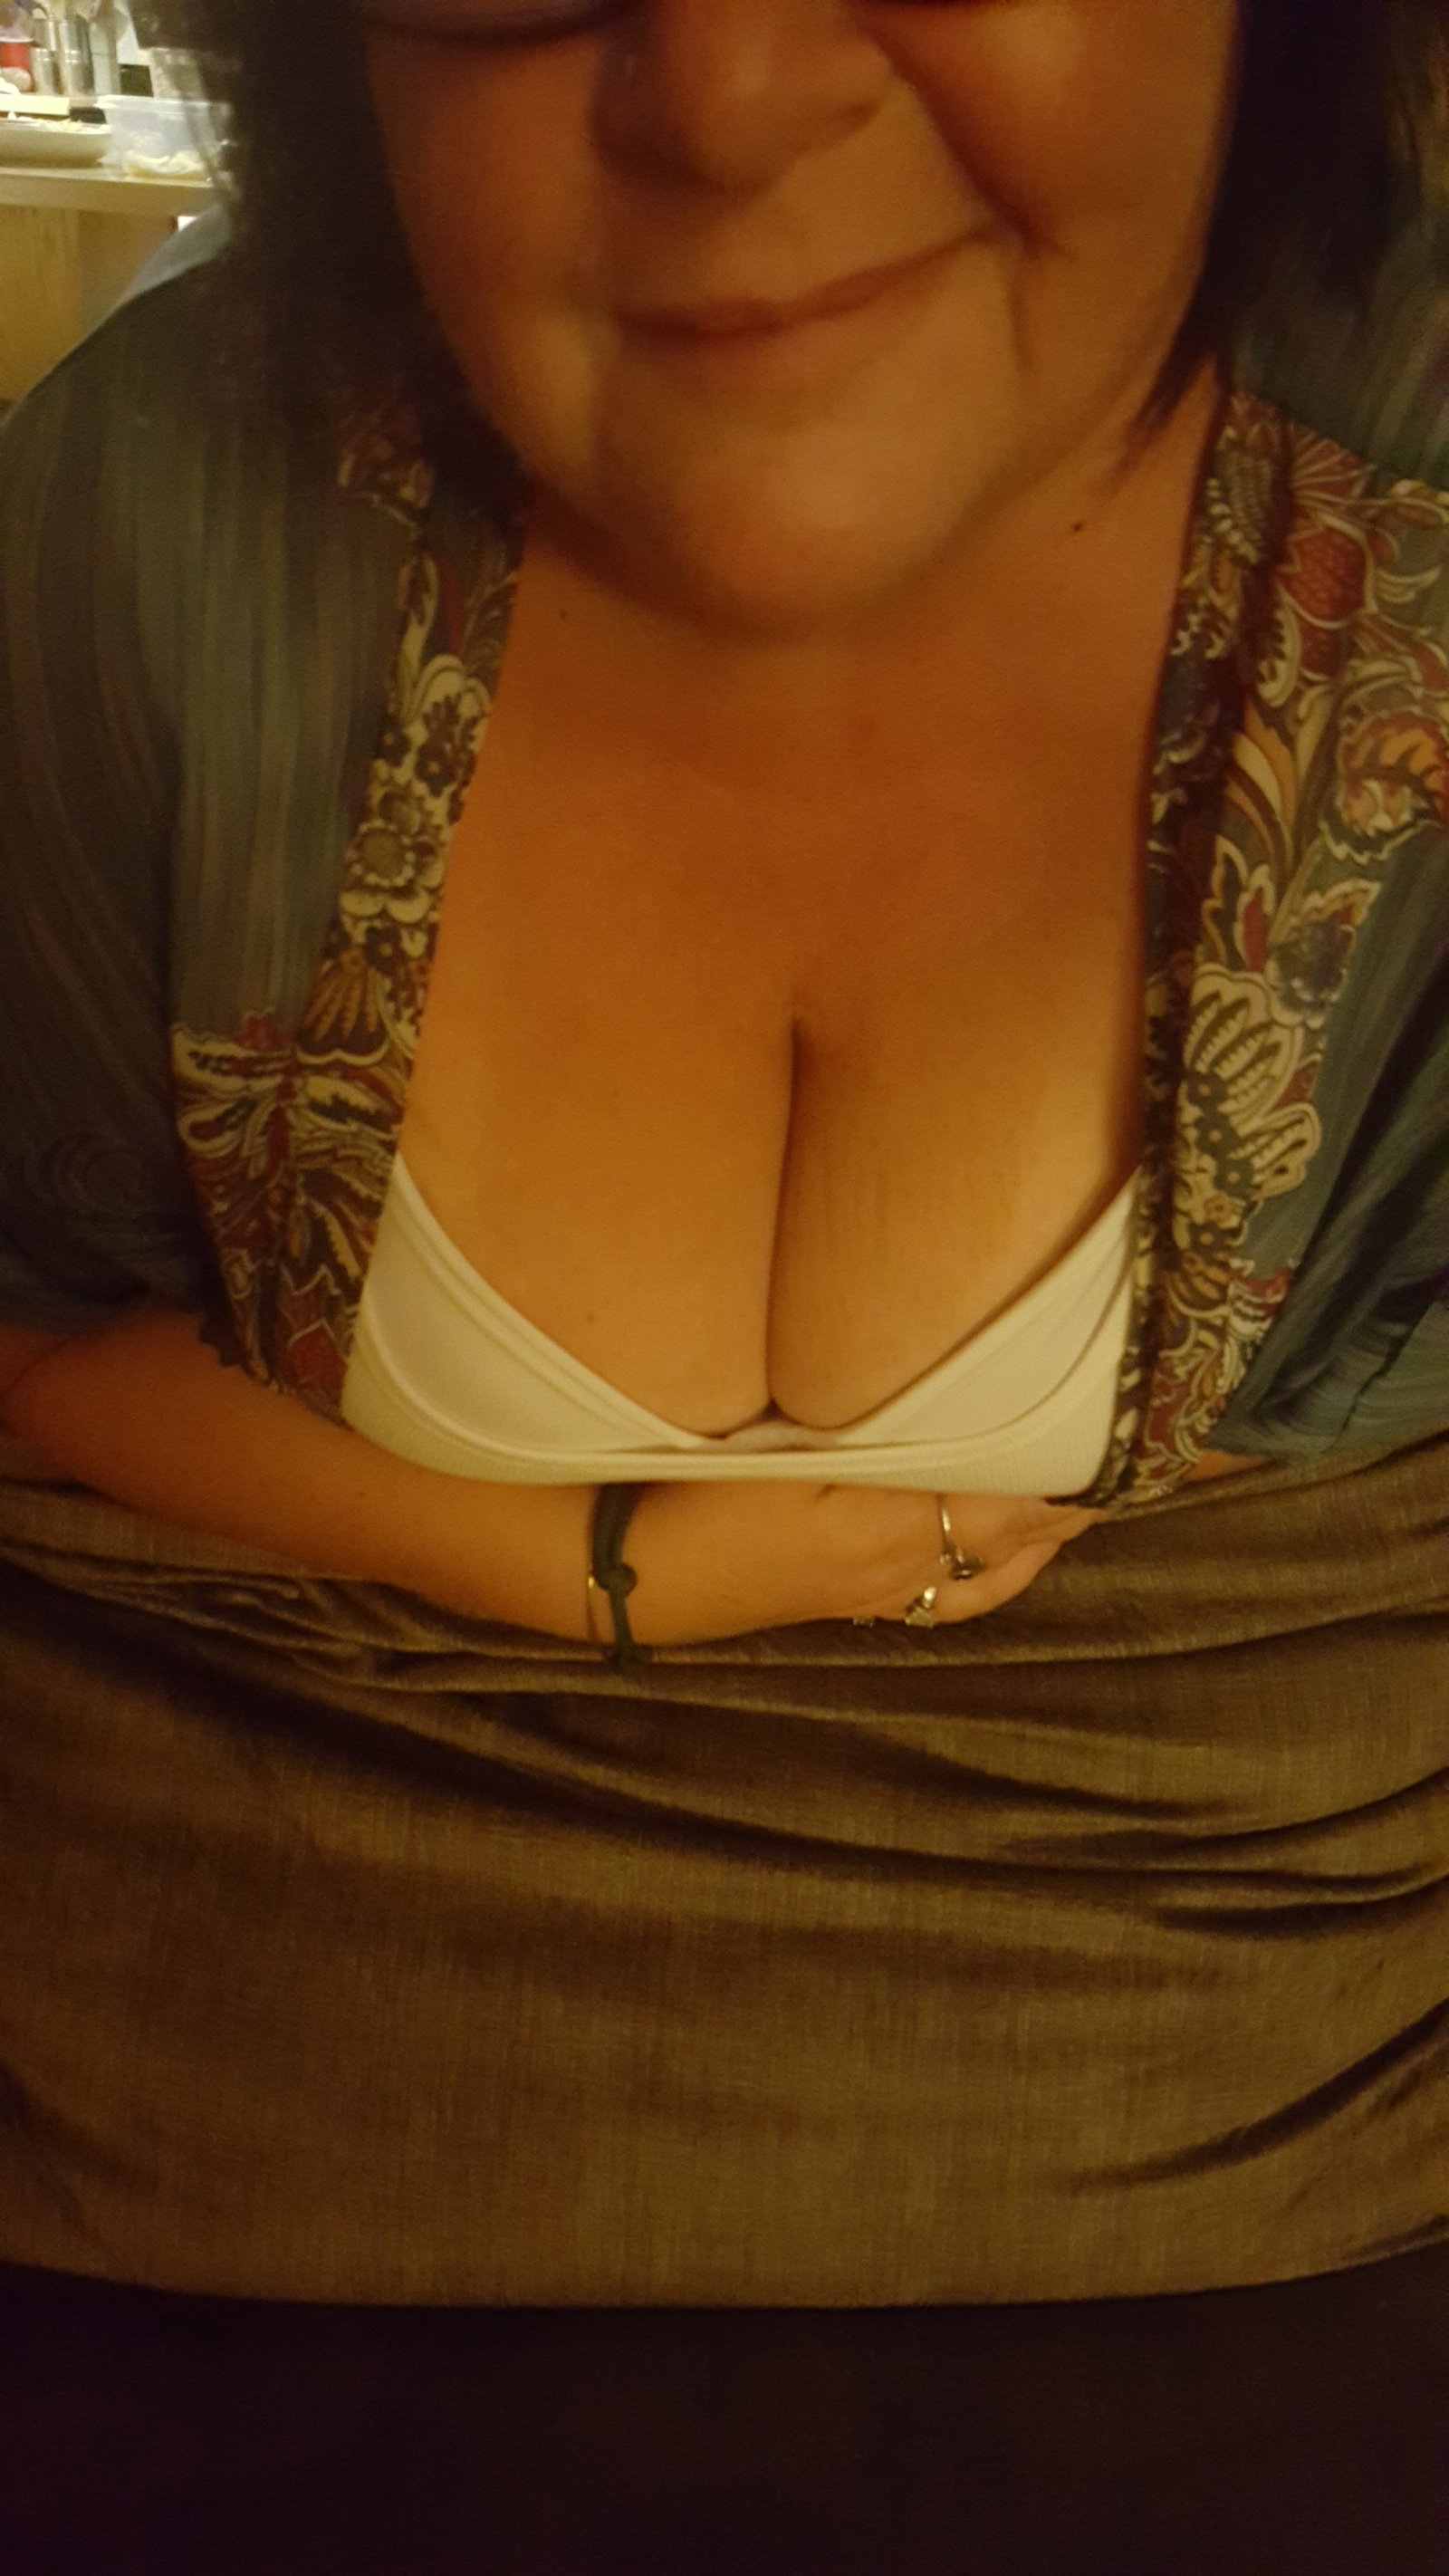 Photo by Dawn42D with the username @Dawn42D,  August 1, 2017 at 7:48 PM and the text says 'Another pic from our photoshoot last night. I&rsquo;m sure she&rsquo;s thinking about how excited she&rsquo;s making you. #downblouse  #cleavage  #sexy  #smile  #smirk  #bbw  #wife  #hotwife  #WVHotBBW  #Dawn42D'